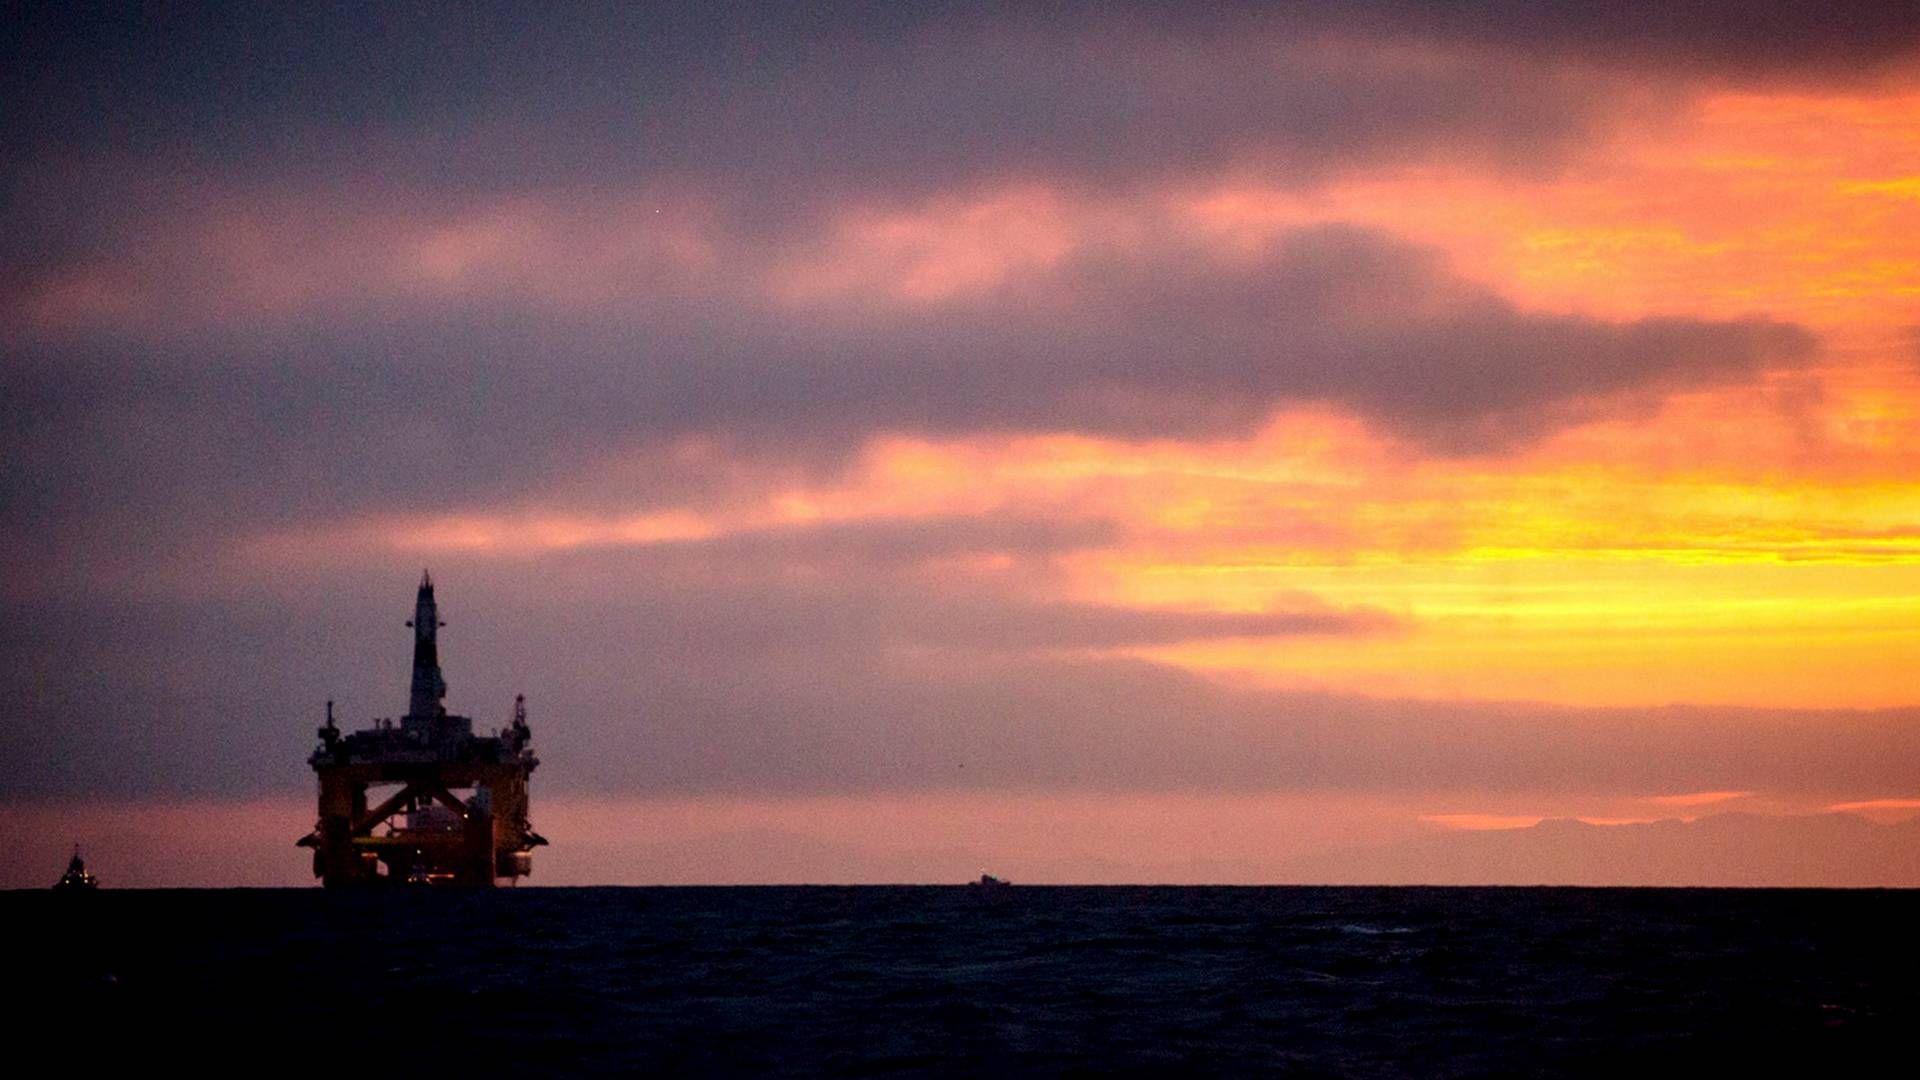 For many years to come, it seems that oil rigs rather than offshore wind turbines will continue to dominate the view in the Gulf of Mexico. | Photo: Polfoto/ap/daniella Beccaria